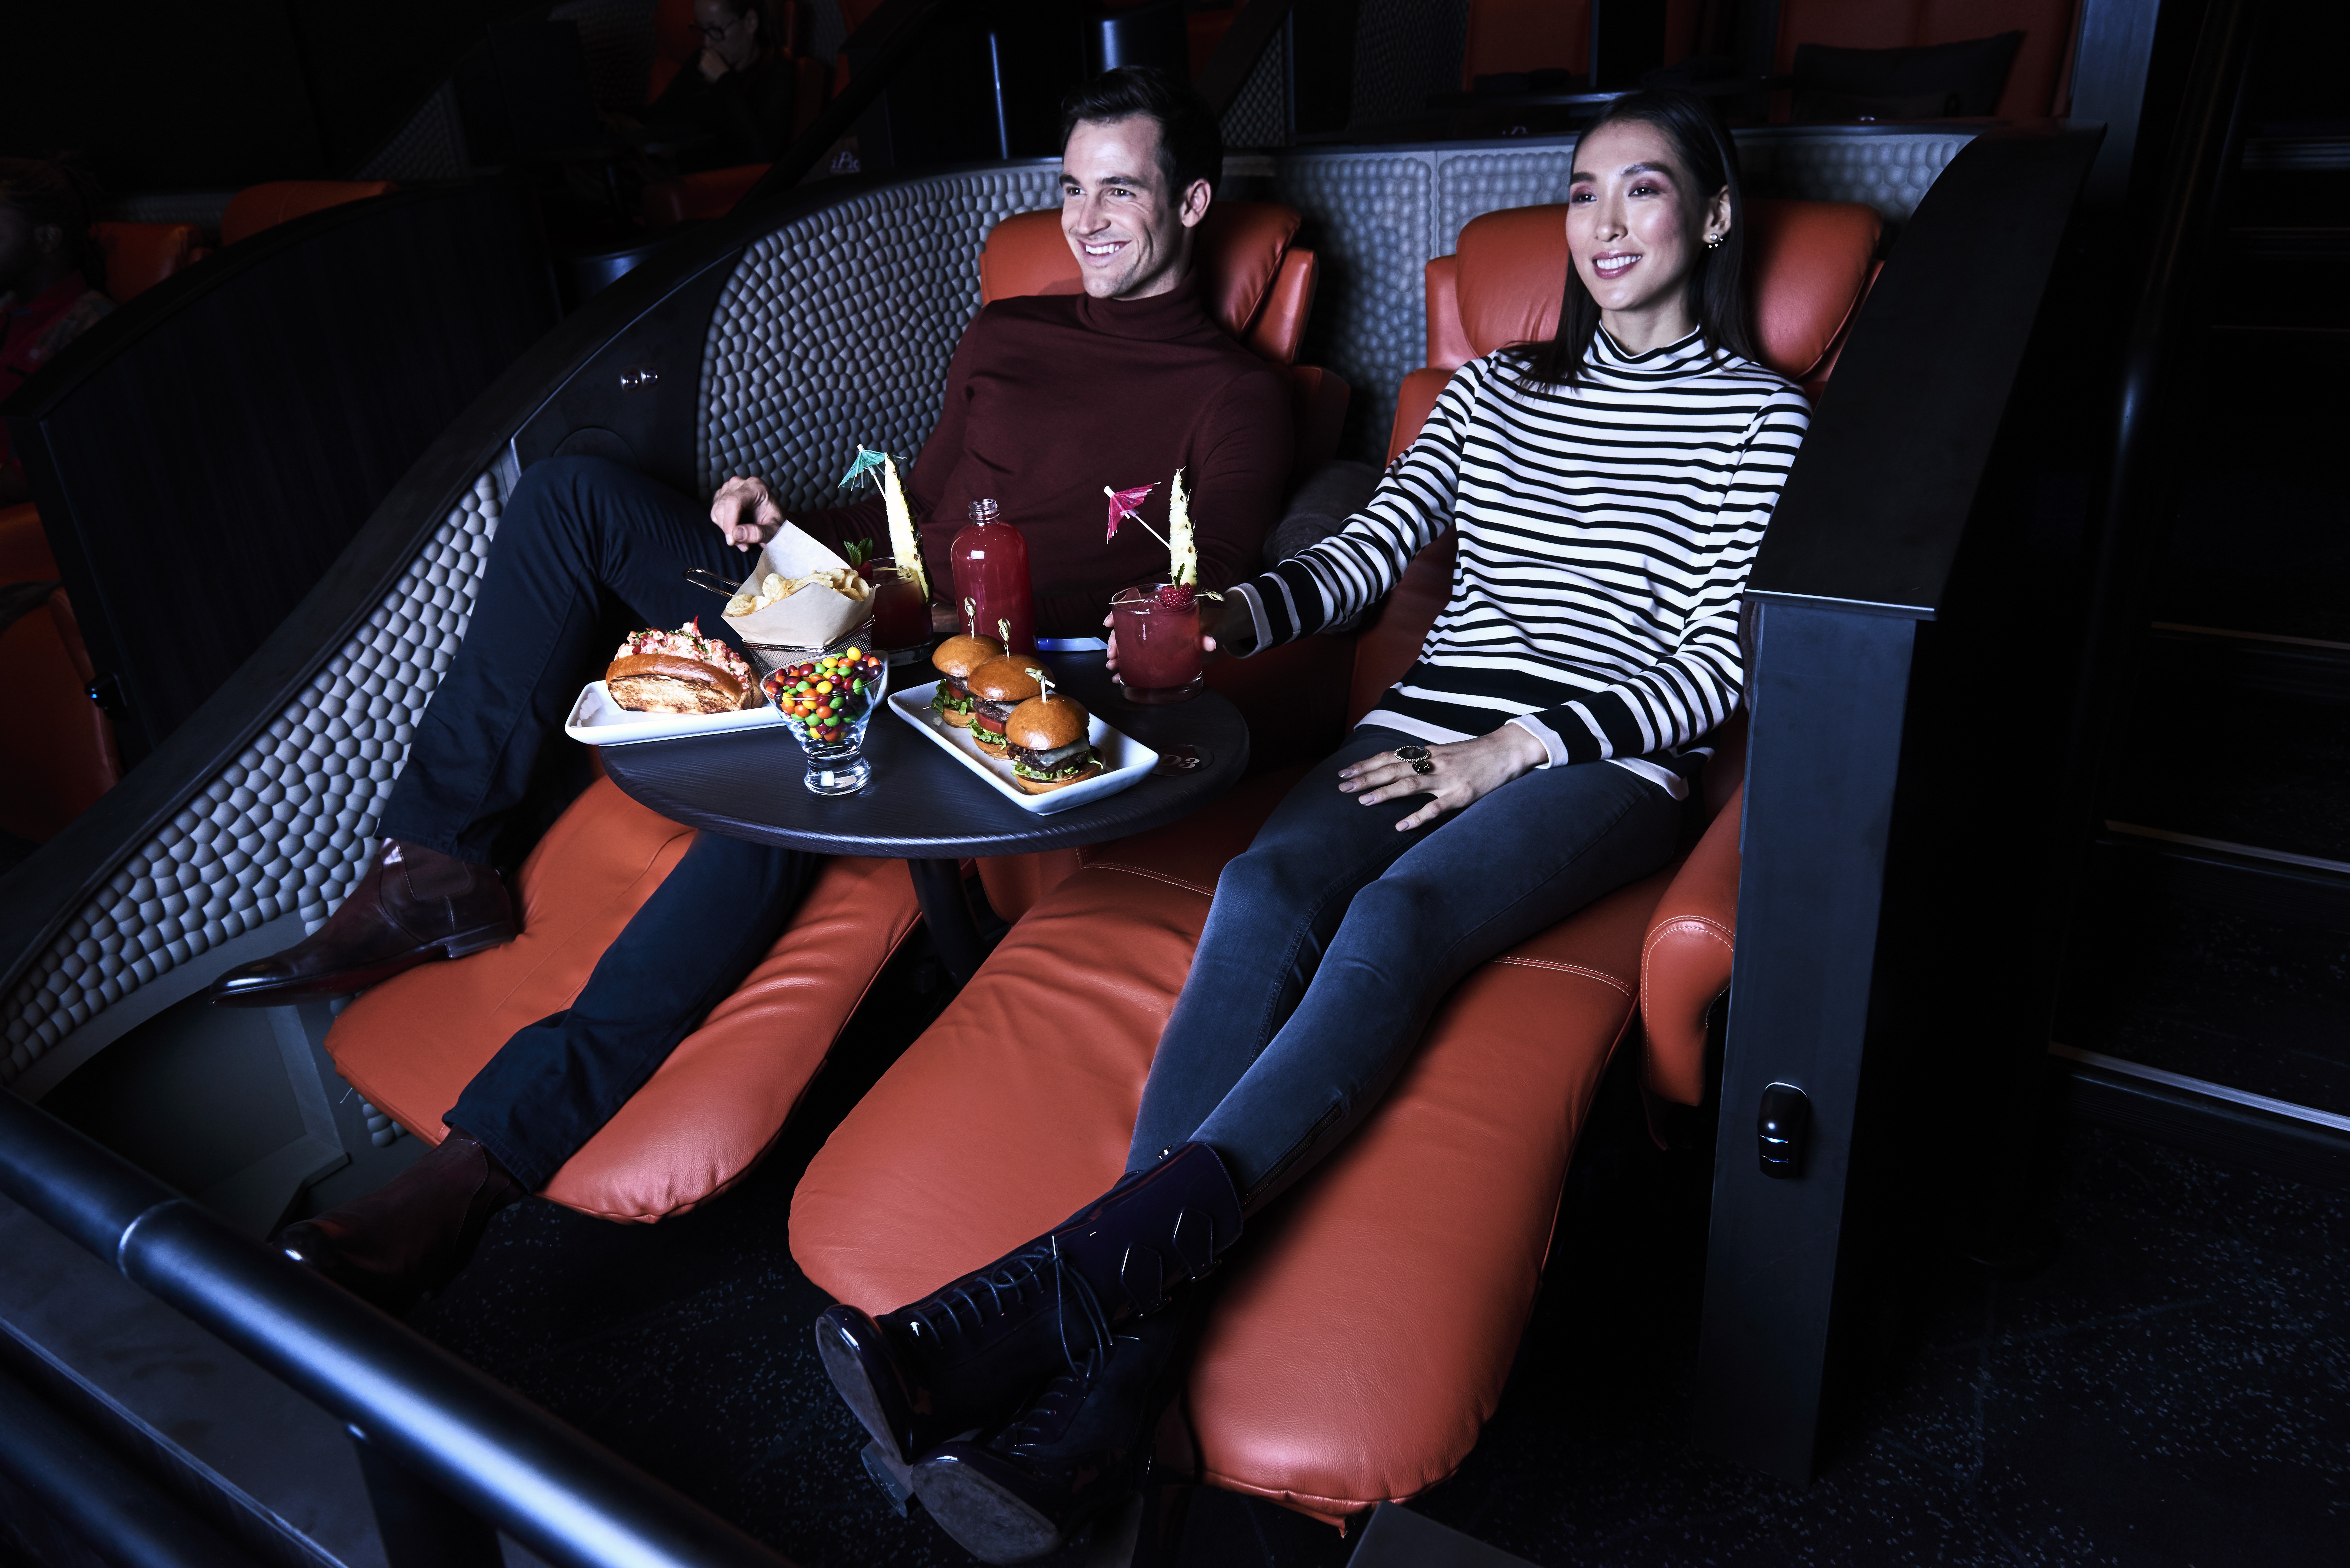 iPic Theaters Mixes Movies, Chefs and Crafted Cocktails for a Luxury Escape...